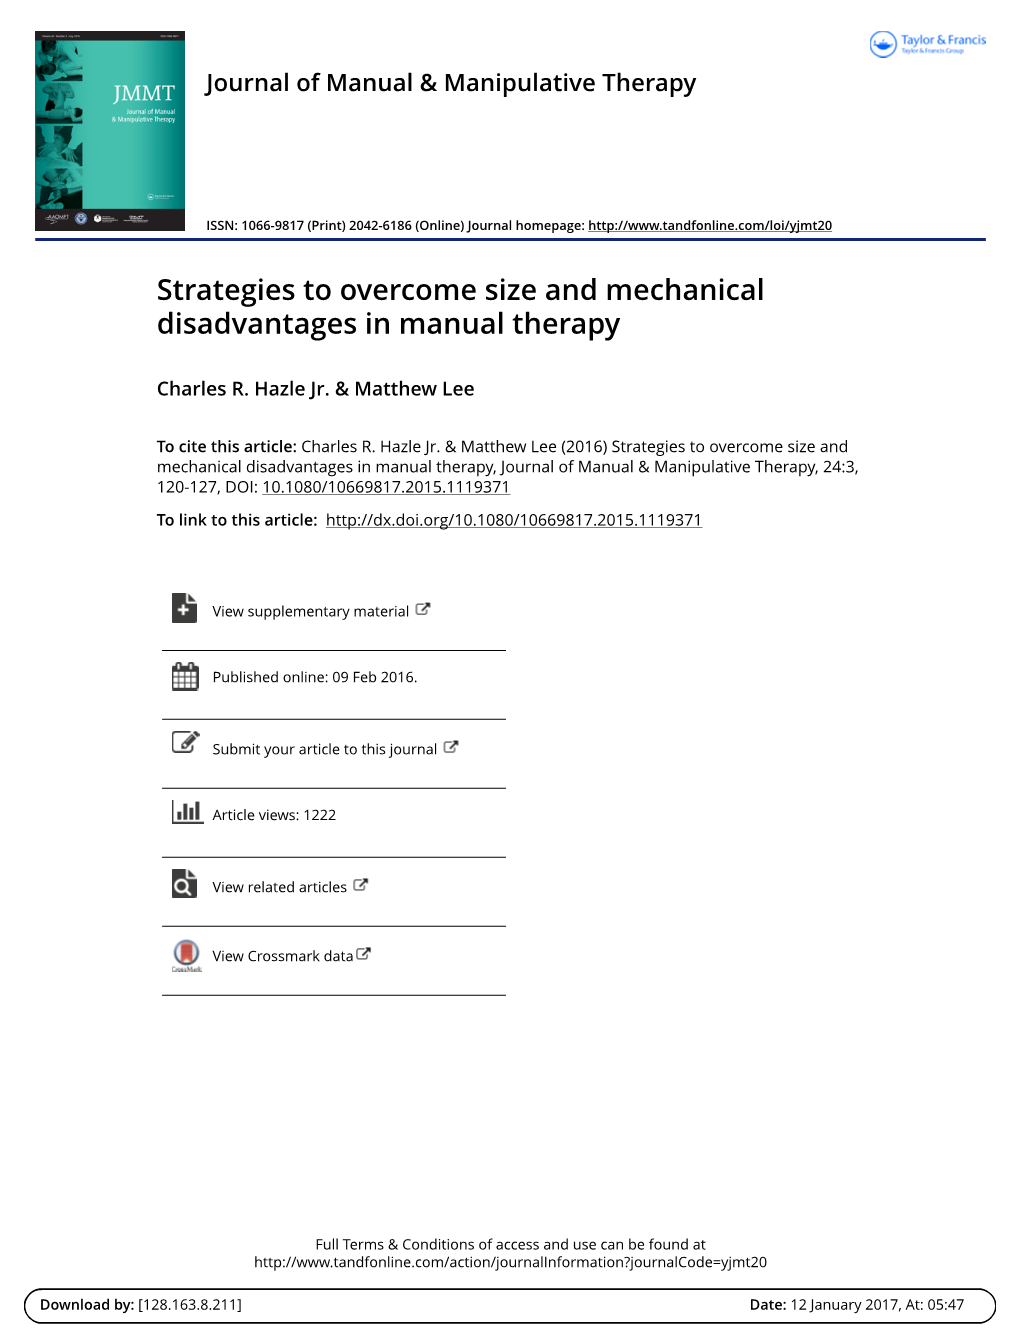 Strategies to Overcome Size and Mechanical Disadvantages in Manual Therapy